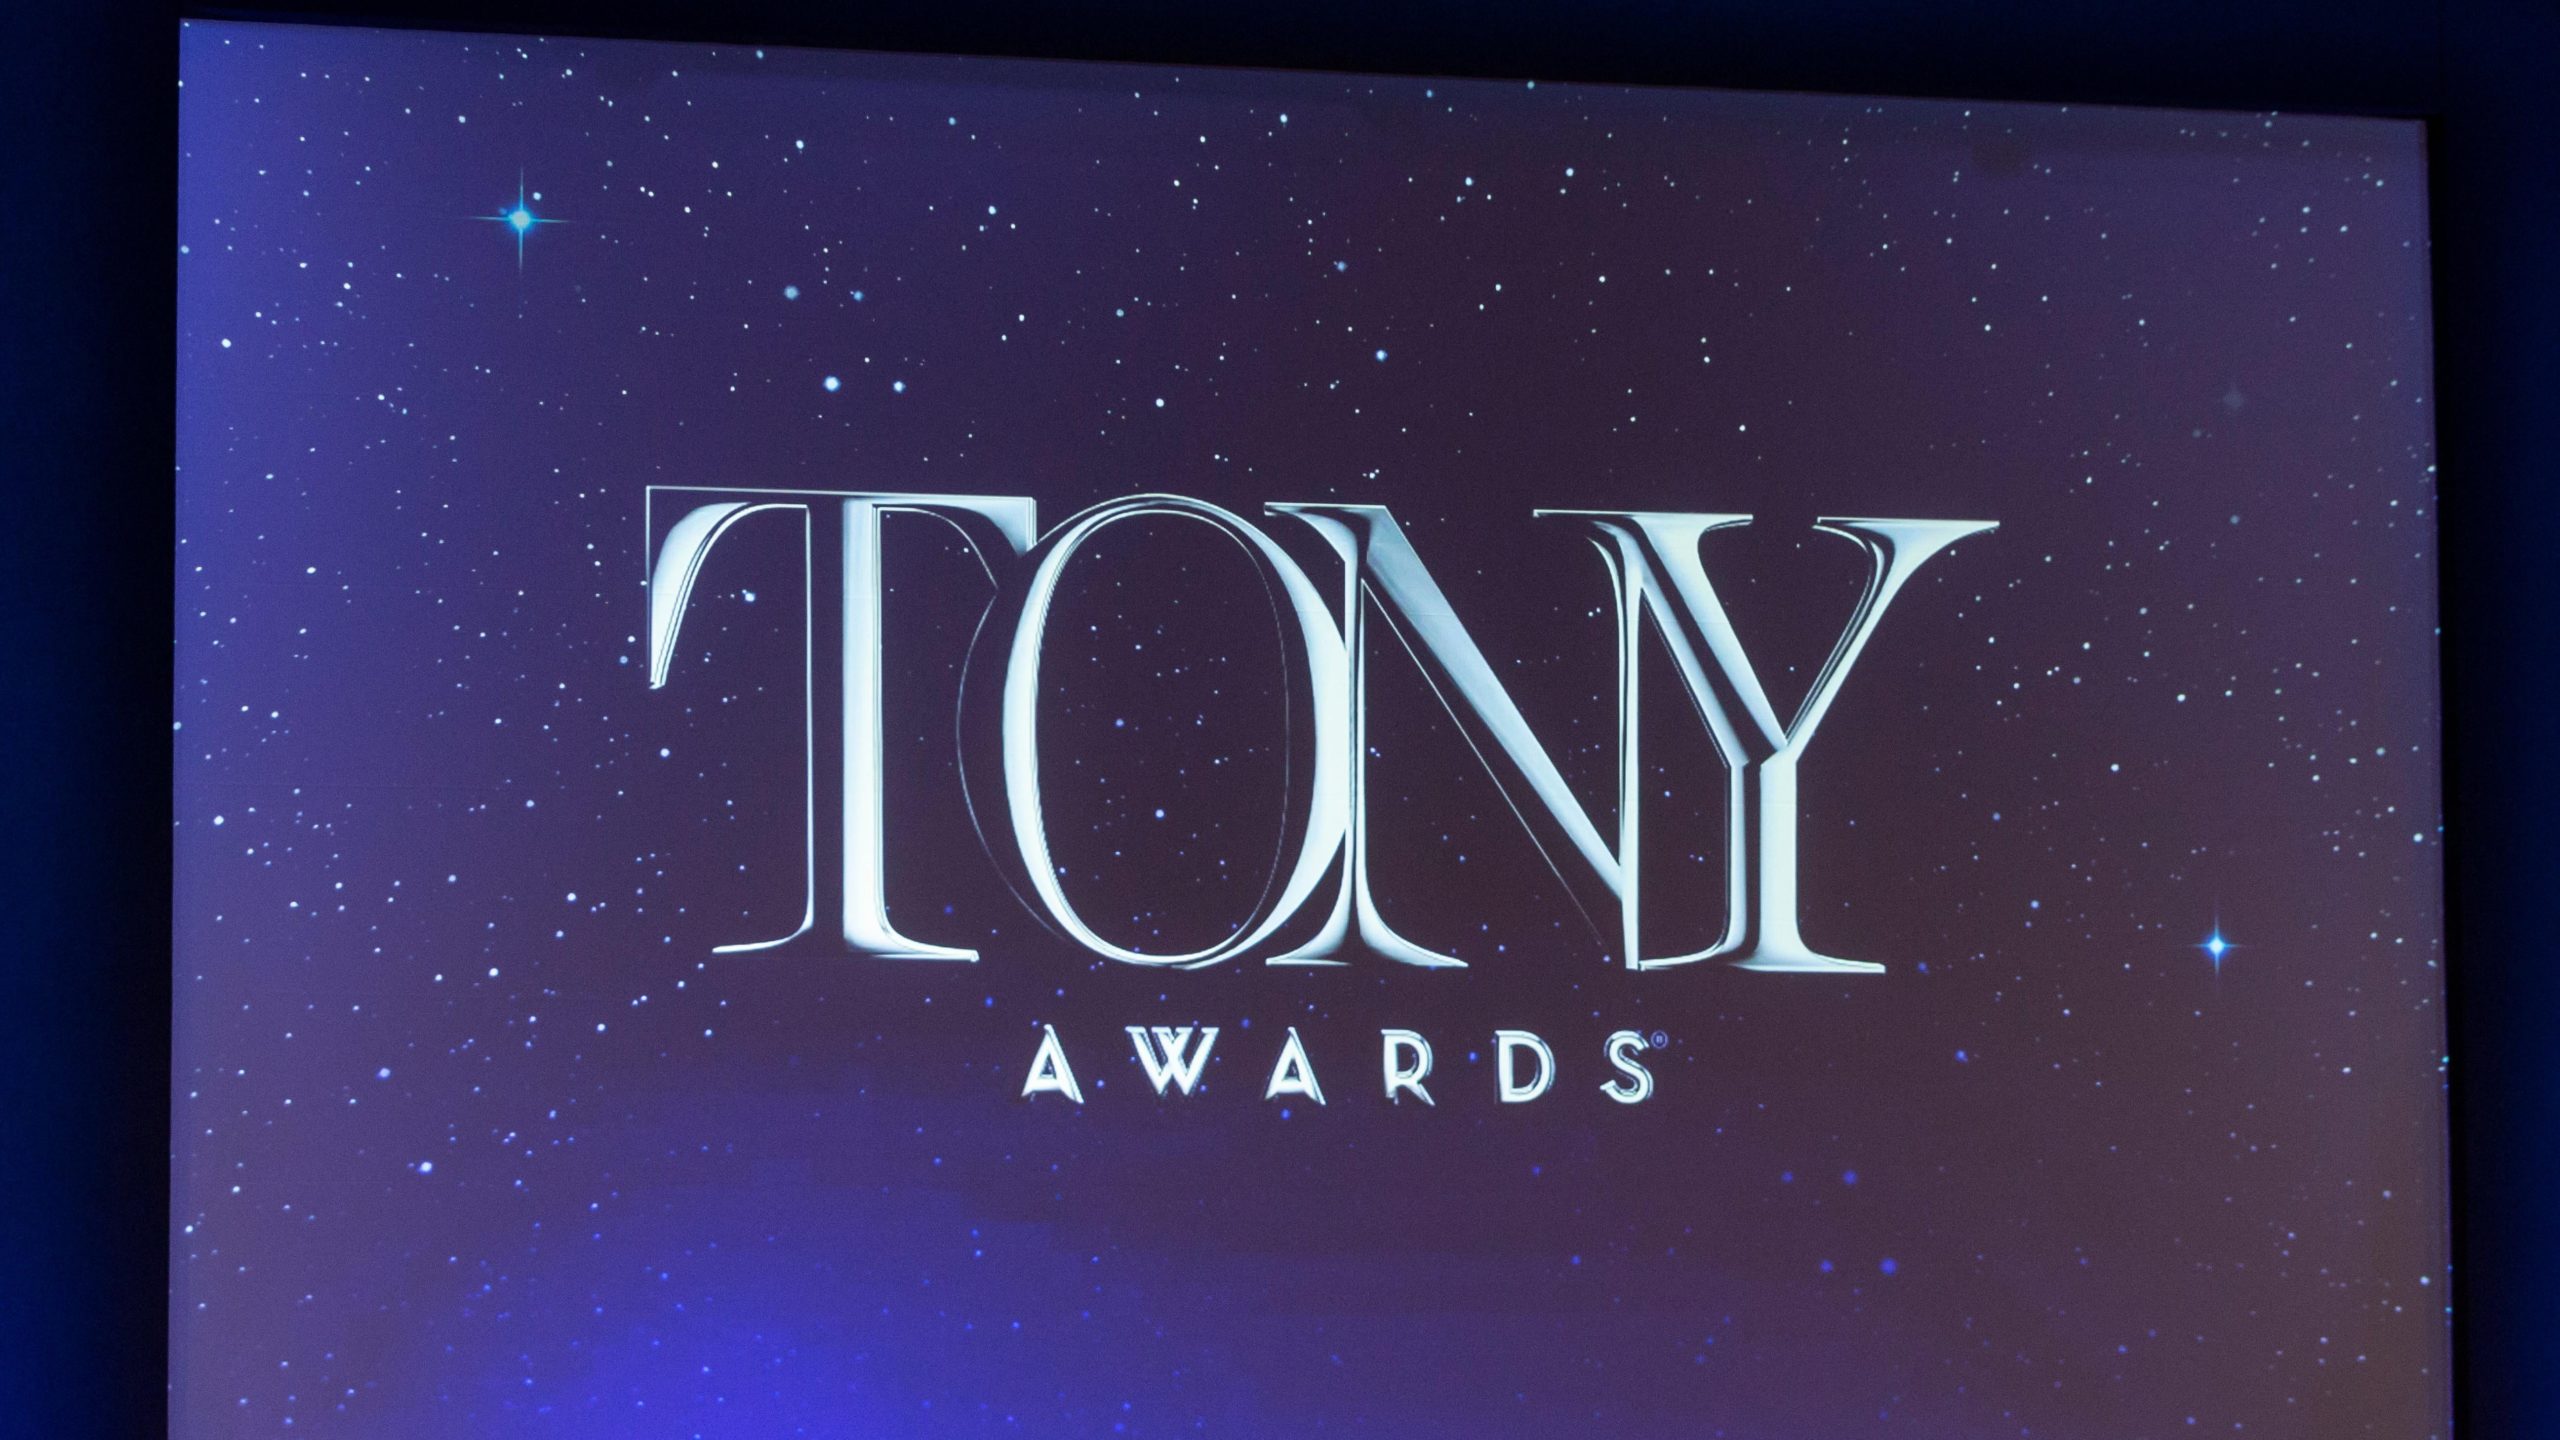 How to Watch the 2021 Tony Awards, and What to Know About This Year’s Show